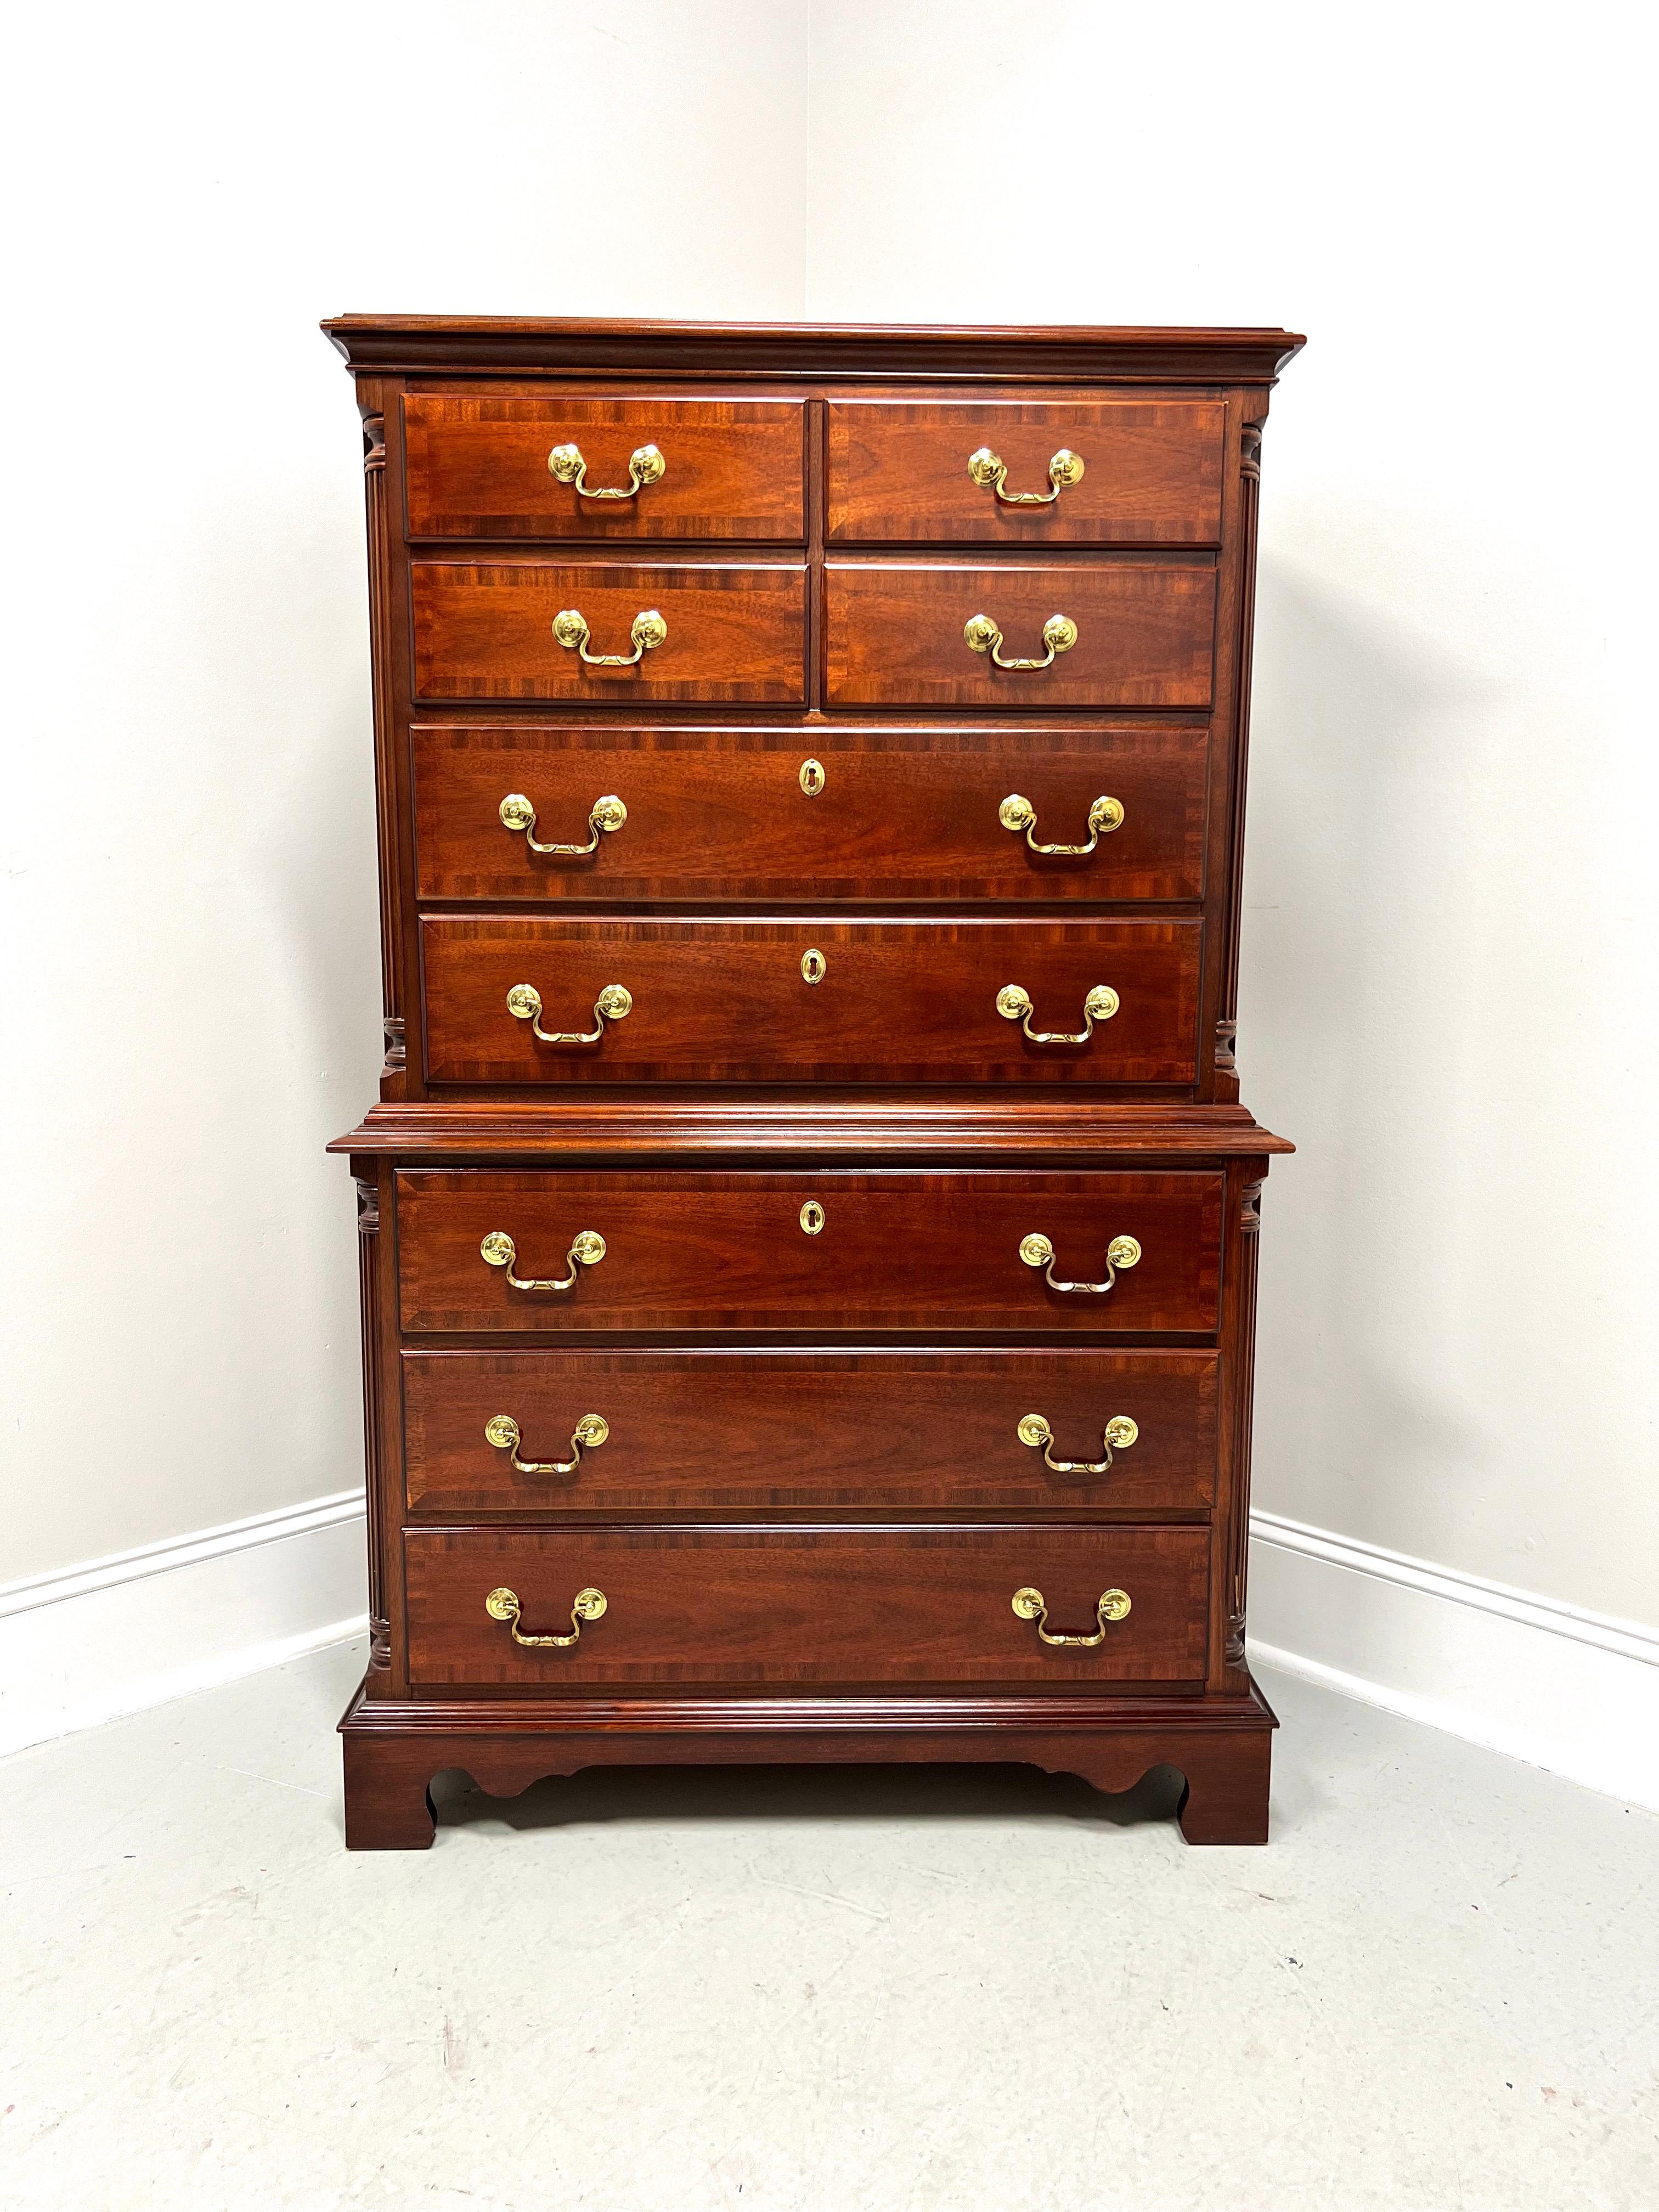 A Chippendale style chest on chest of drawers by Lexington Furniture. Mahogany with brass hardware, banded top with an ogee edge, banded drawer fronts, decoratively carved columns to front sides, ogee edge dividing chests, and bracket feet. Features